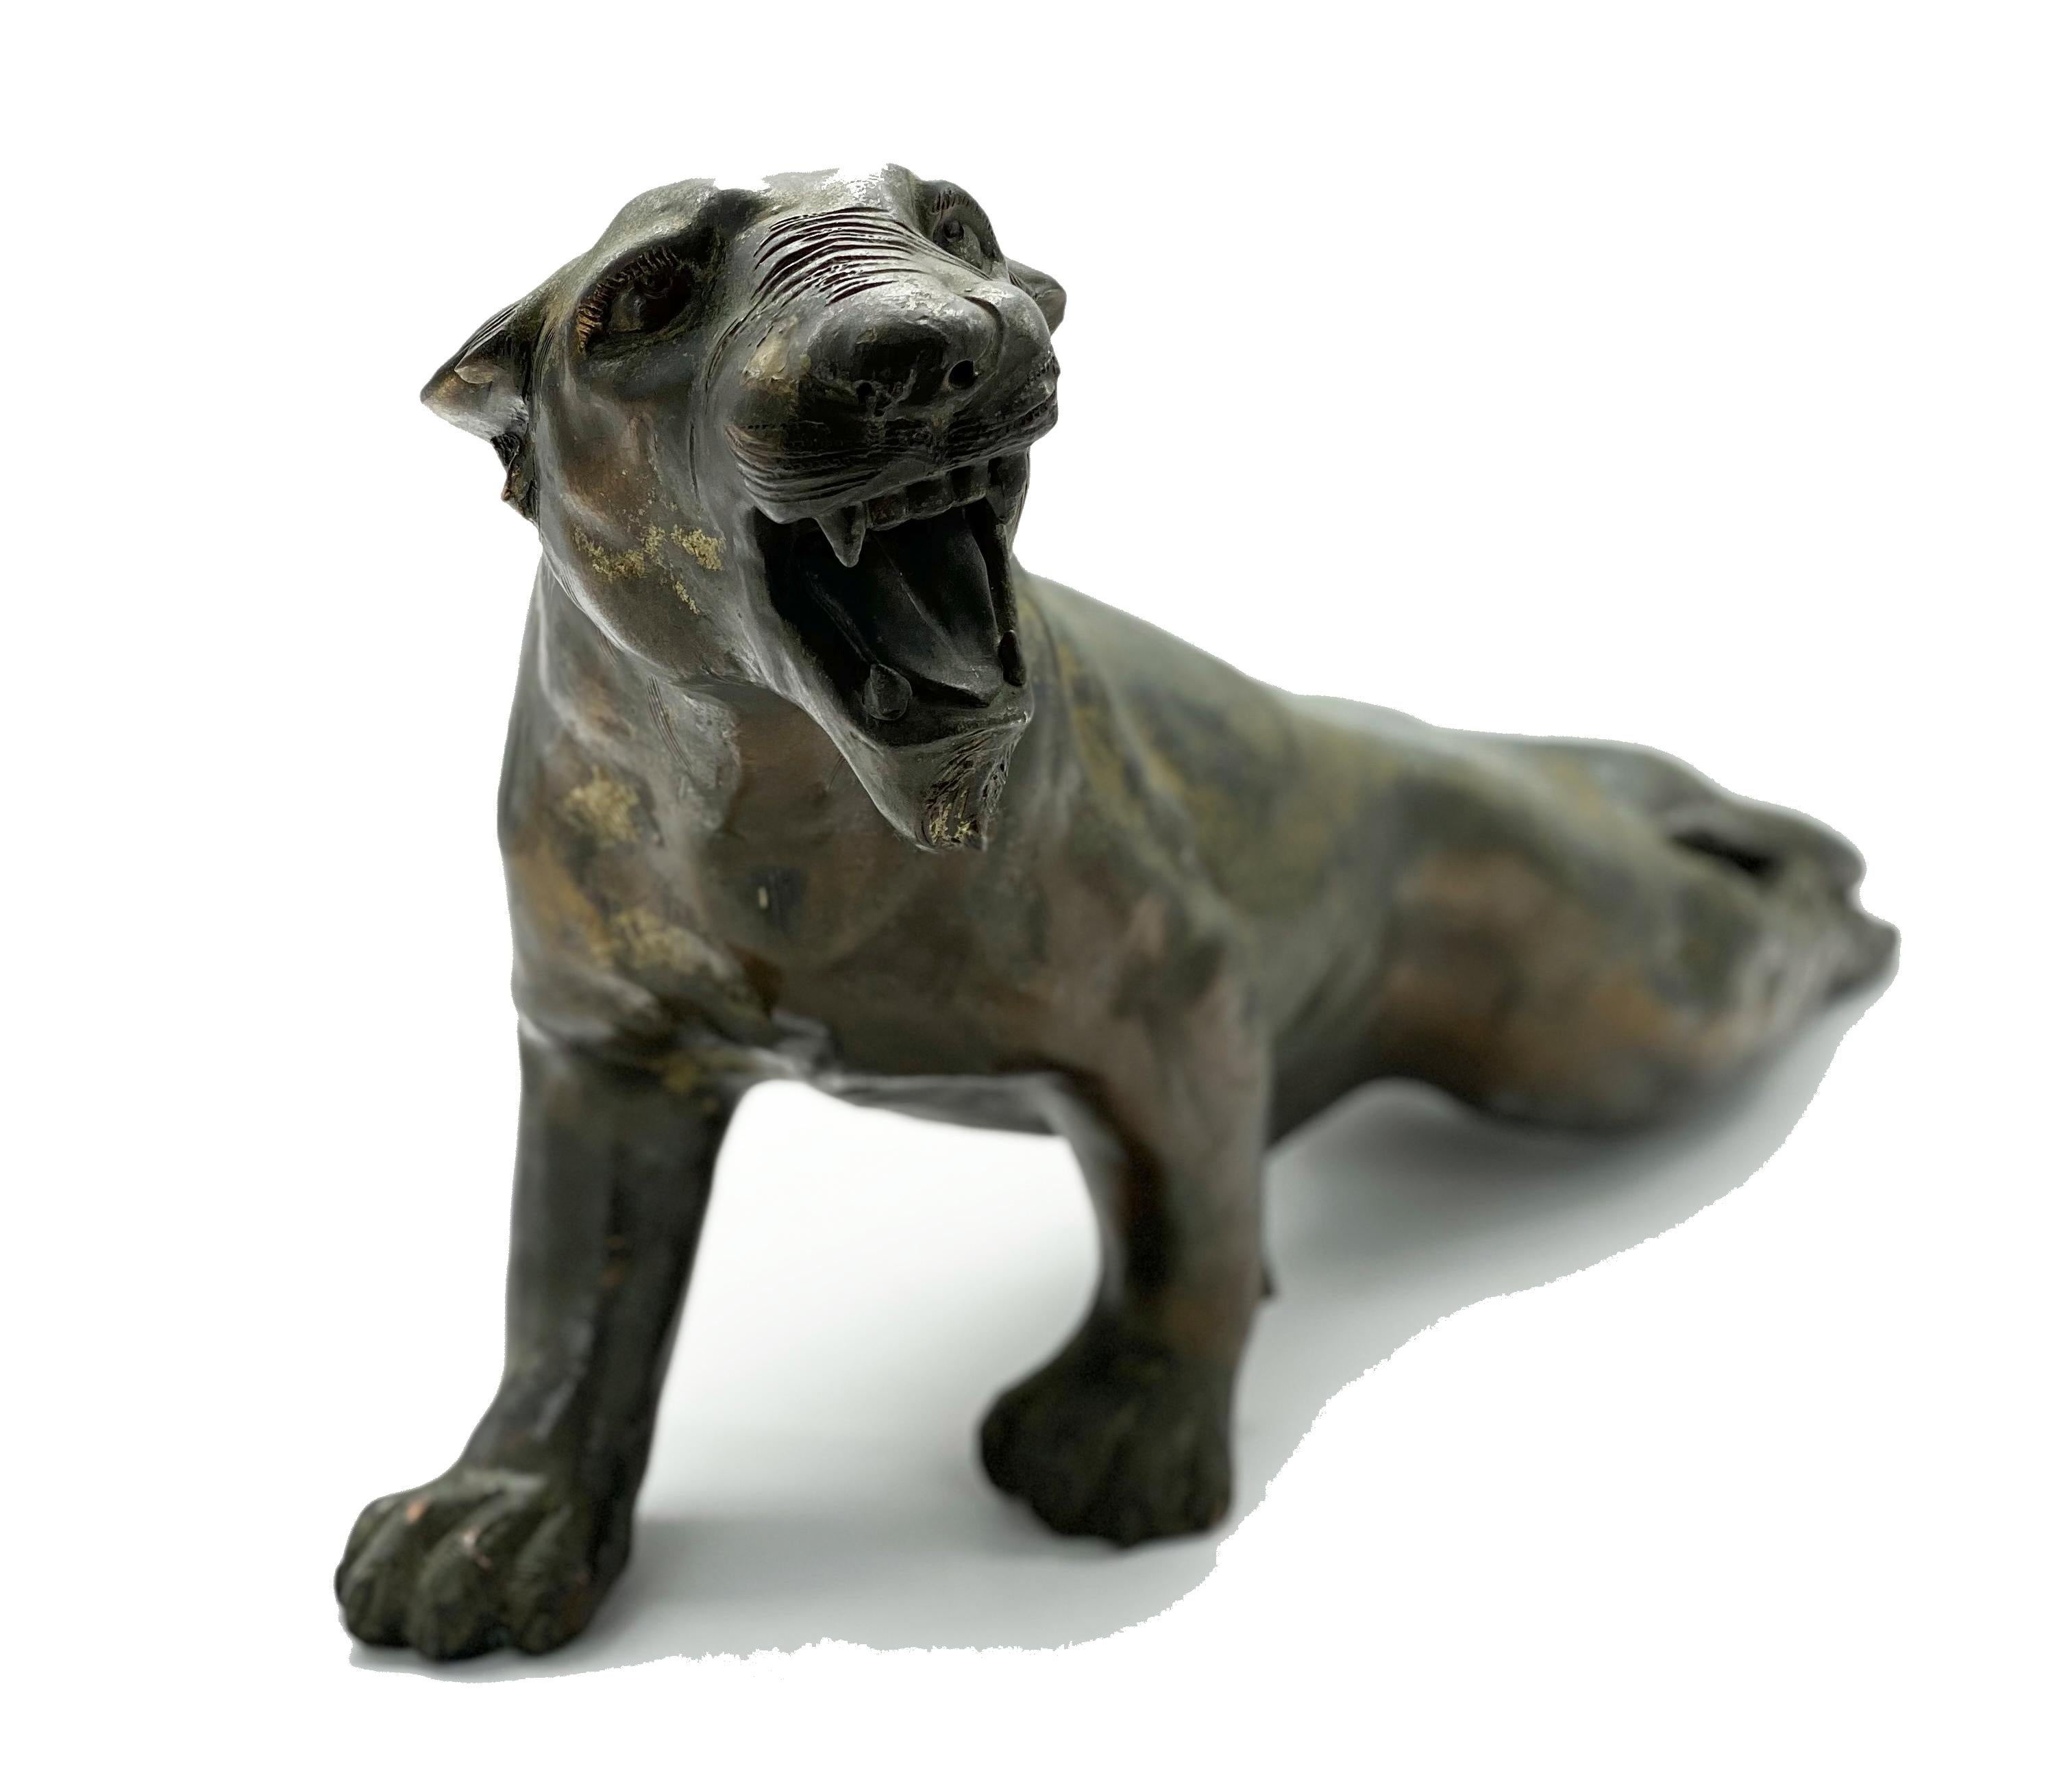 Walnut wood sculpture depicting a panther in attacking pose. The sculpture is particularly fascinating for its realistic attention to detail, which gives the animal a remarkable sense of plasticity.